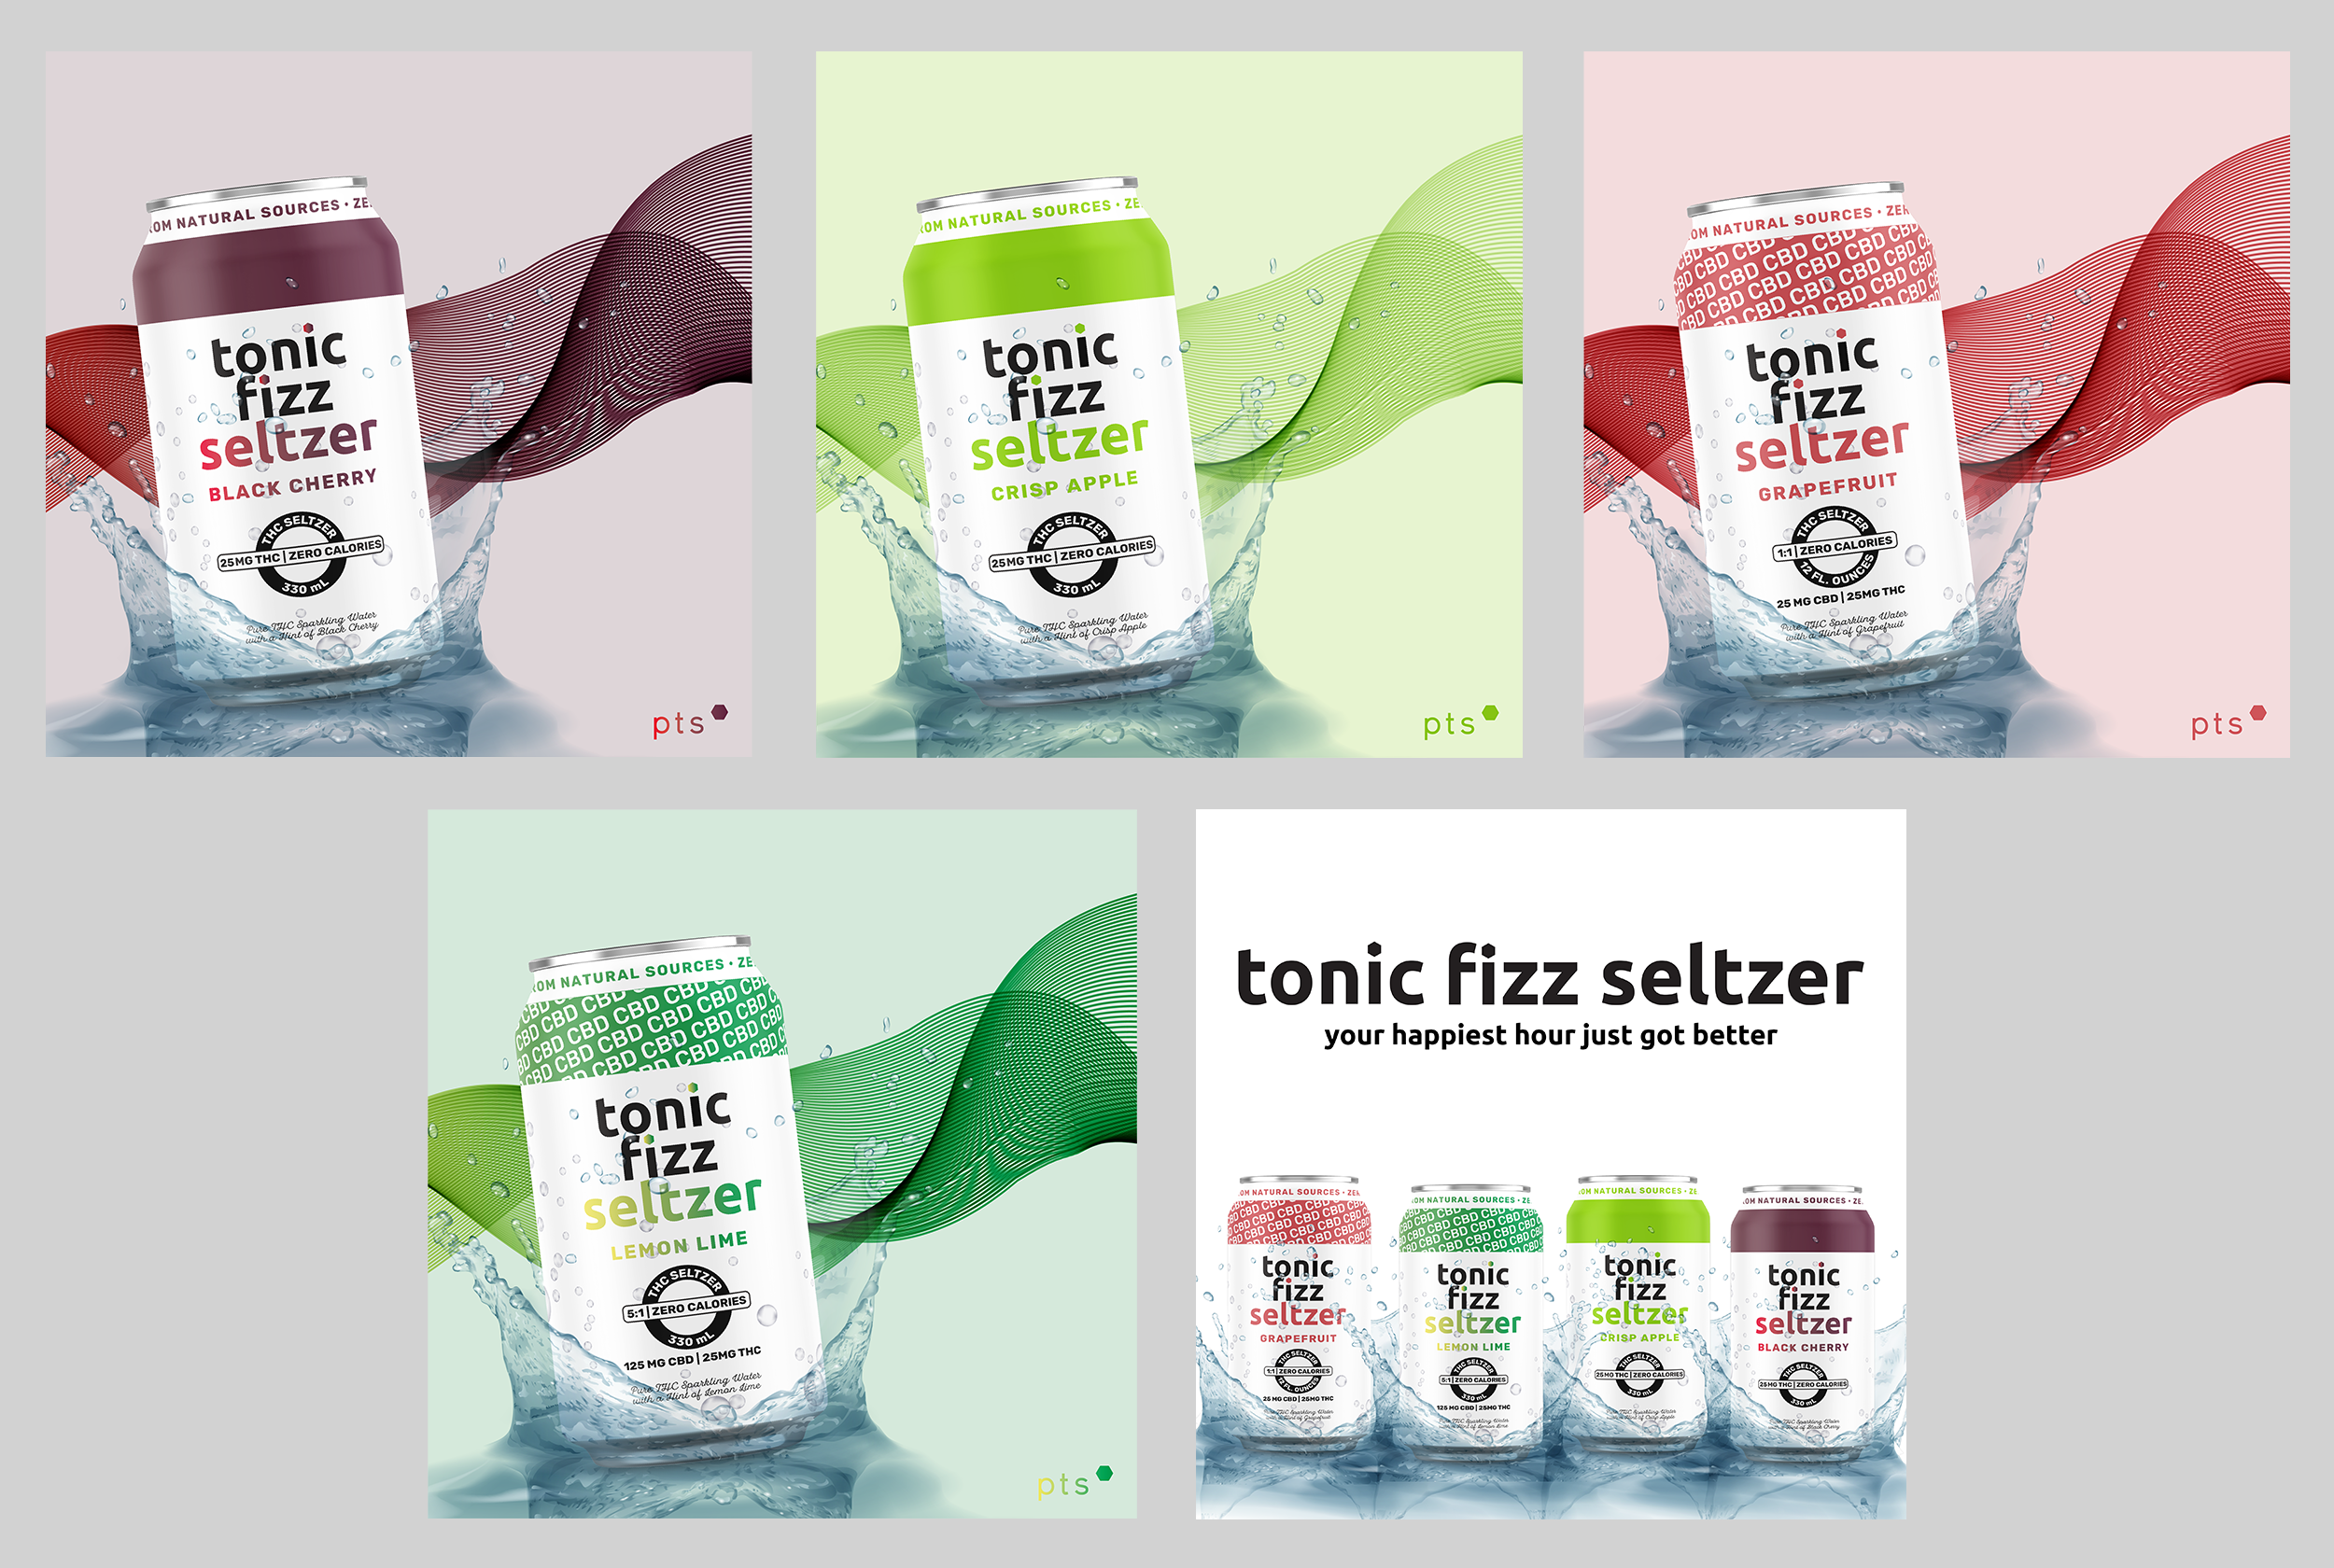   PTS TONIC FIZZ THC INFUSED SELTZER WATER PRODUCT LAUNCH SOCIAL MEDIA SERIES    © PROGRESSIVE TREATMENT SOLUTIONS 2020  